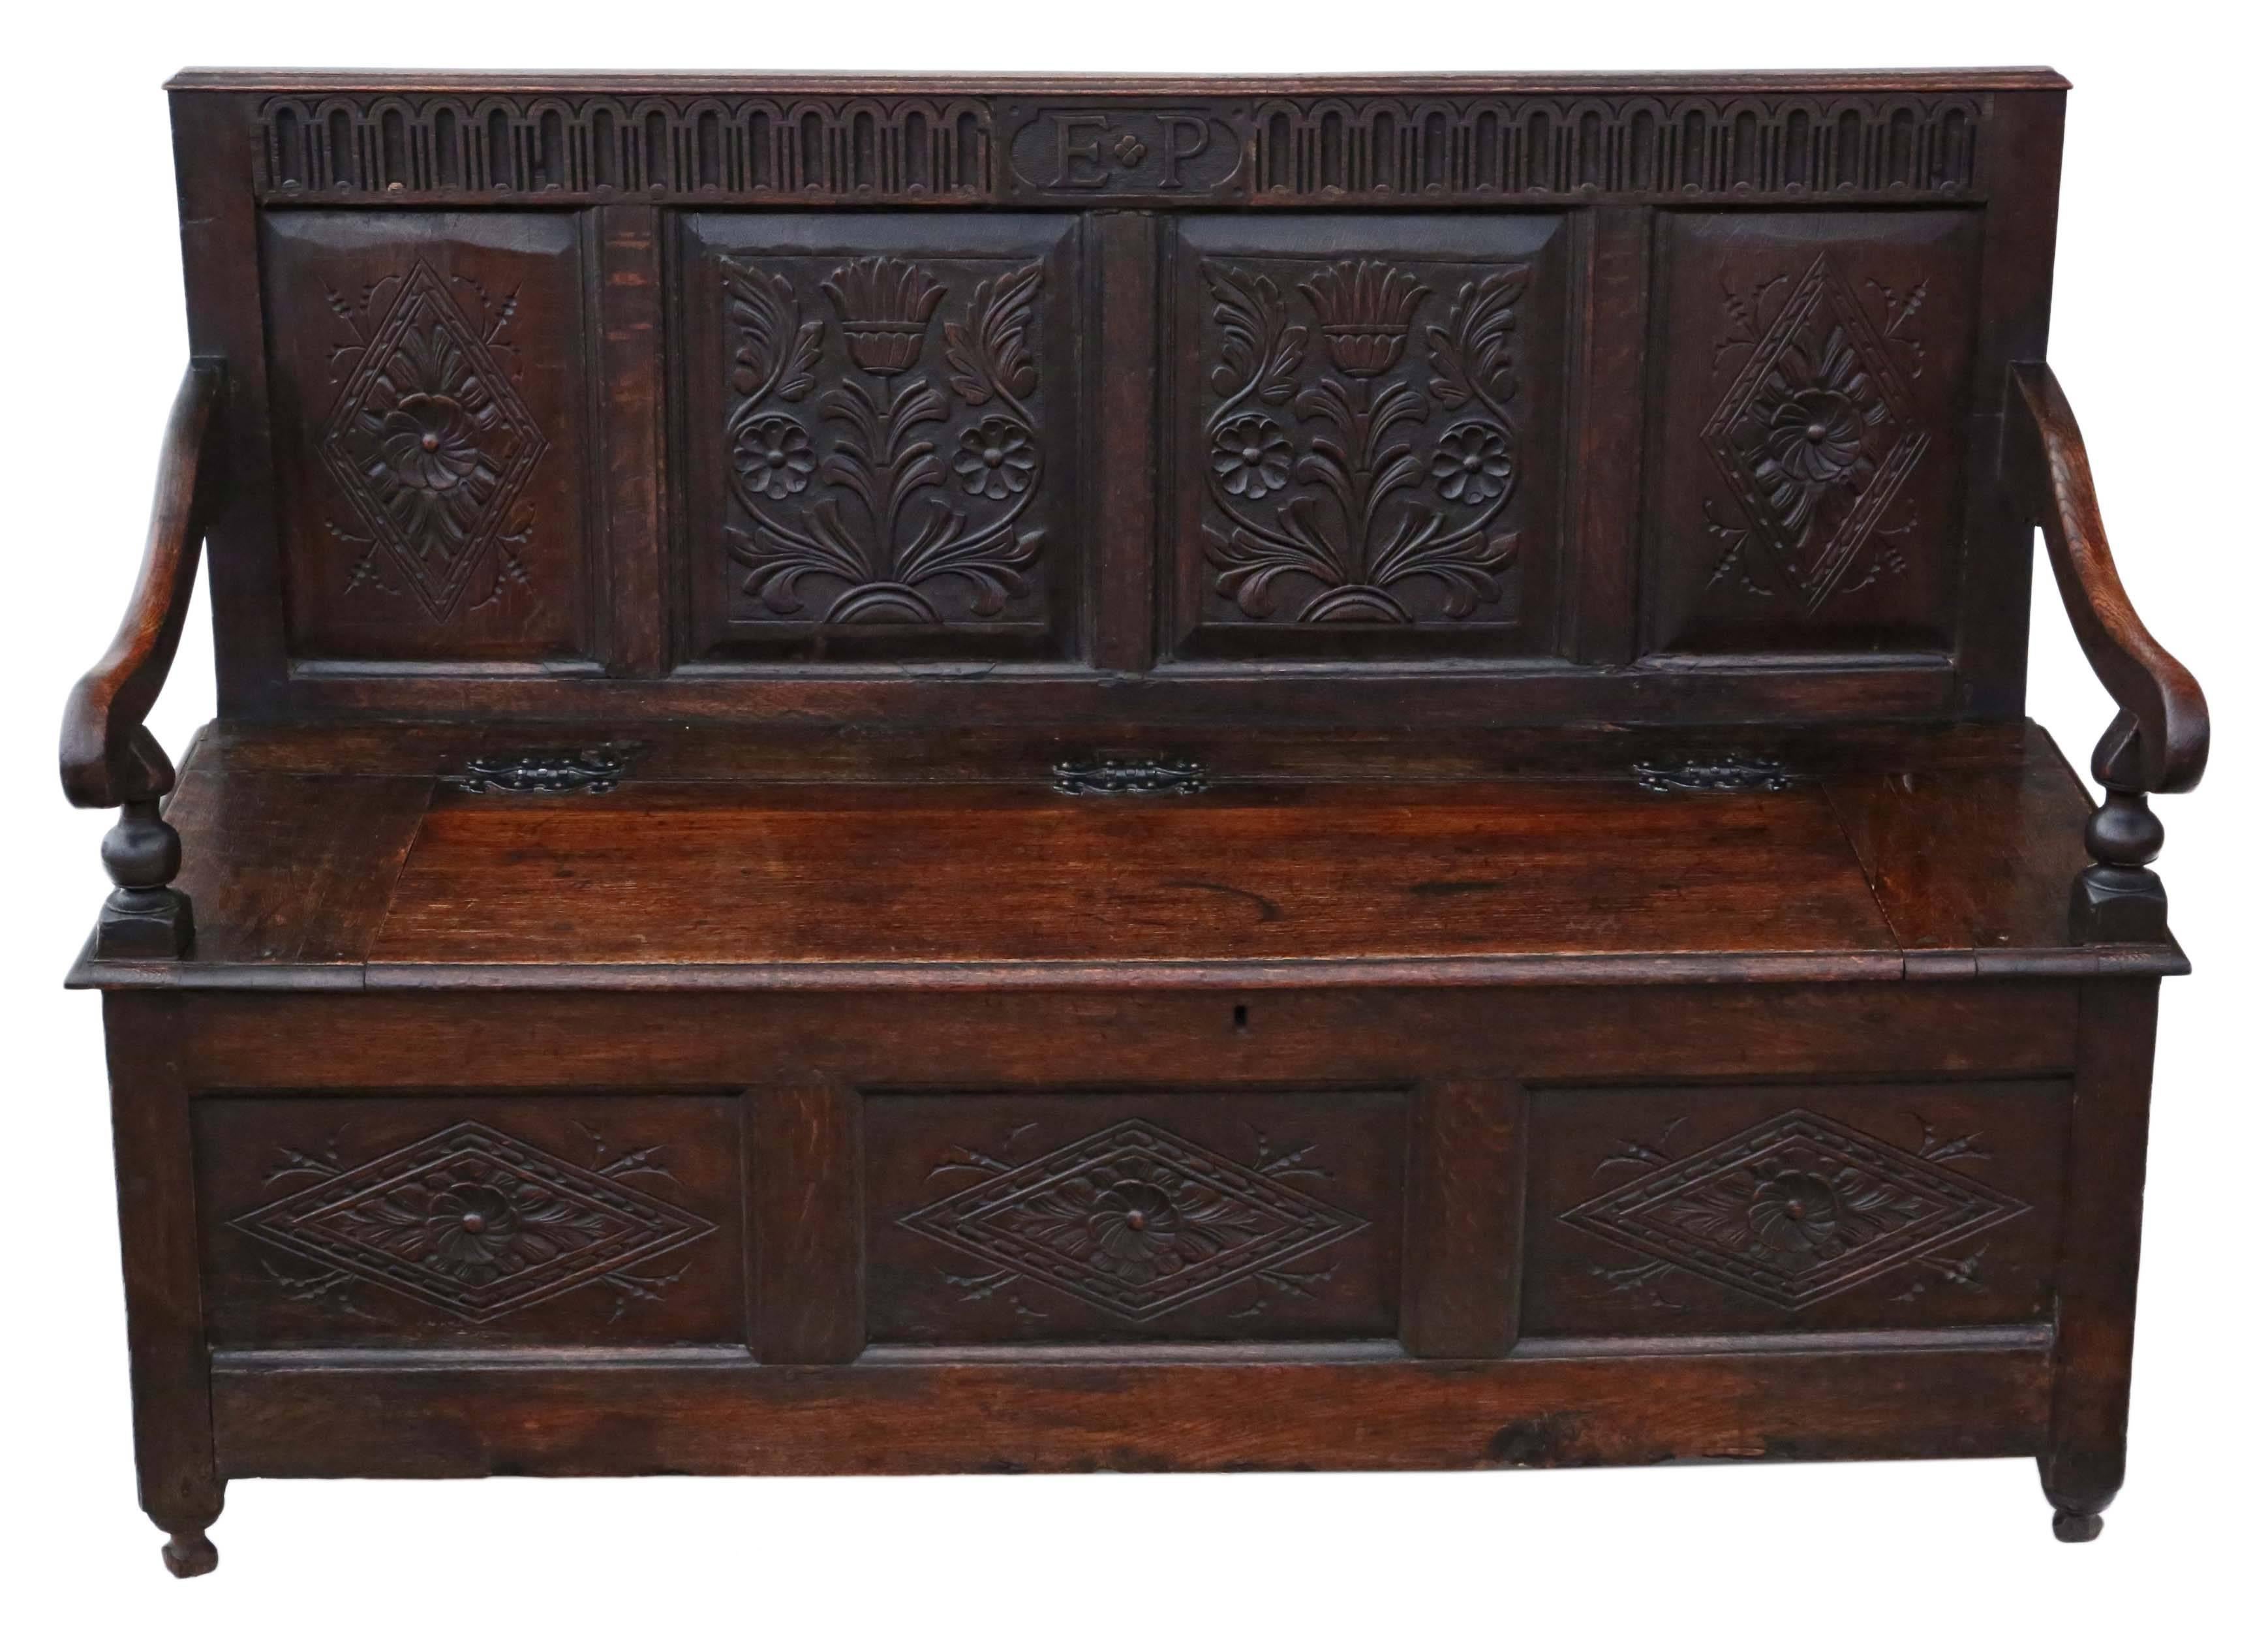 Antique 18th century Georgian carved oak settle with a lift up seat coffer.

Solid and strong, with no loose joints. Full of age, character and charm.

Would look great in the right location!

Overall maximum dimensions: 155.5cmW x 66cmD x